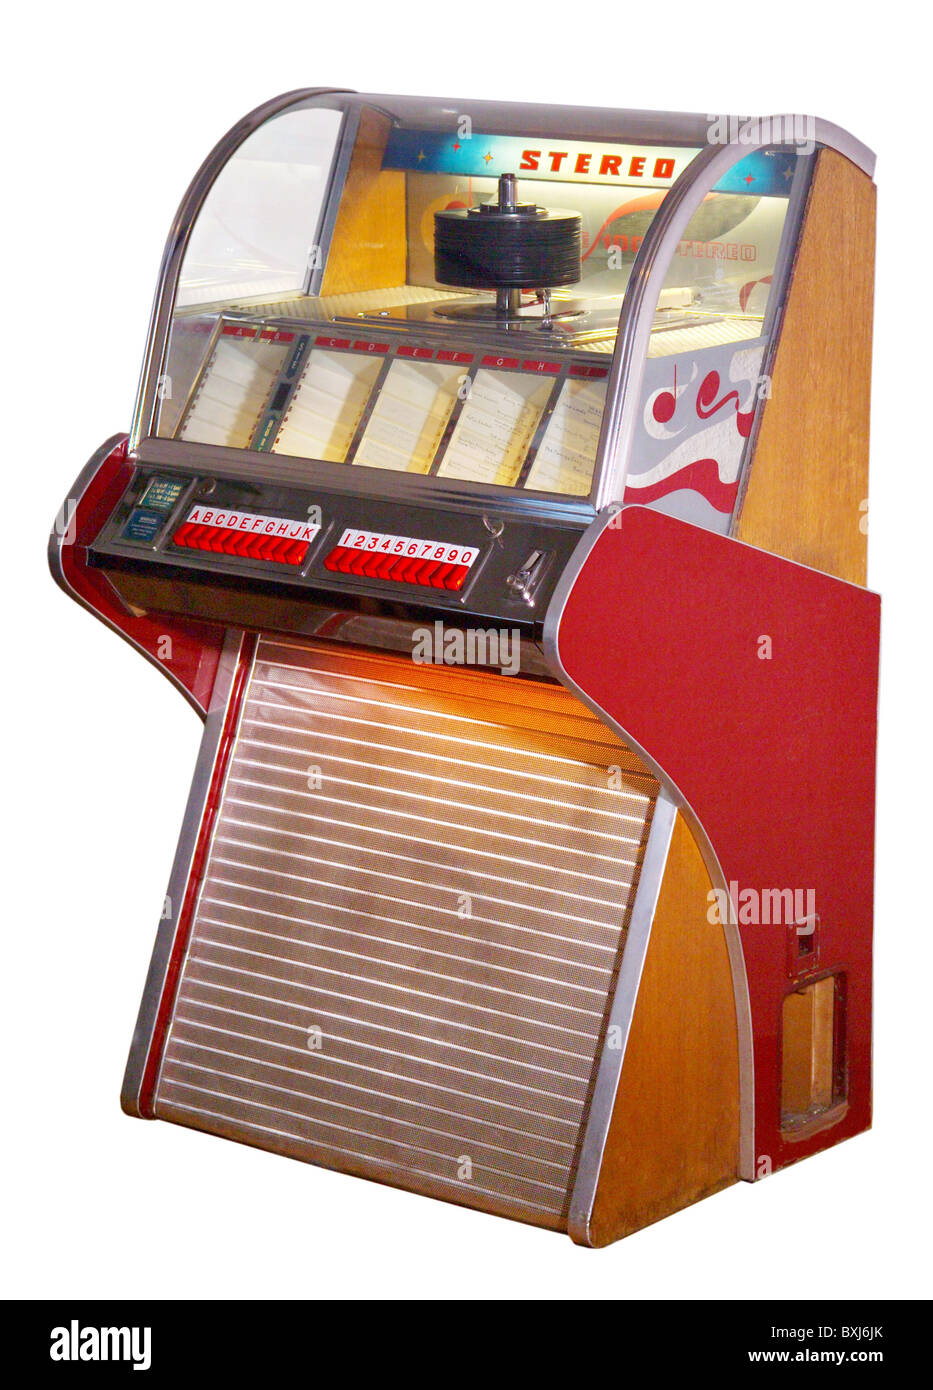 music, jukebox, musicbox Fanfare 100 Stereo, slotmachine, produced 1959-1962, NSM Apparatebau GmbH, Bingen, Germany, 1959, 1950s, 50s, 20th century, historic, historical, record, records, record player, pop music, hit parade, oldie, musical piece, wish, audio, economic miracle, economic miracles, W.M.Weber collection, clipping, cut out, cut-out, cut-outs, Additional-Rights-Clearences-Not Available Stock Photo